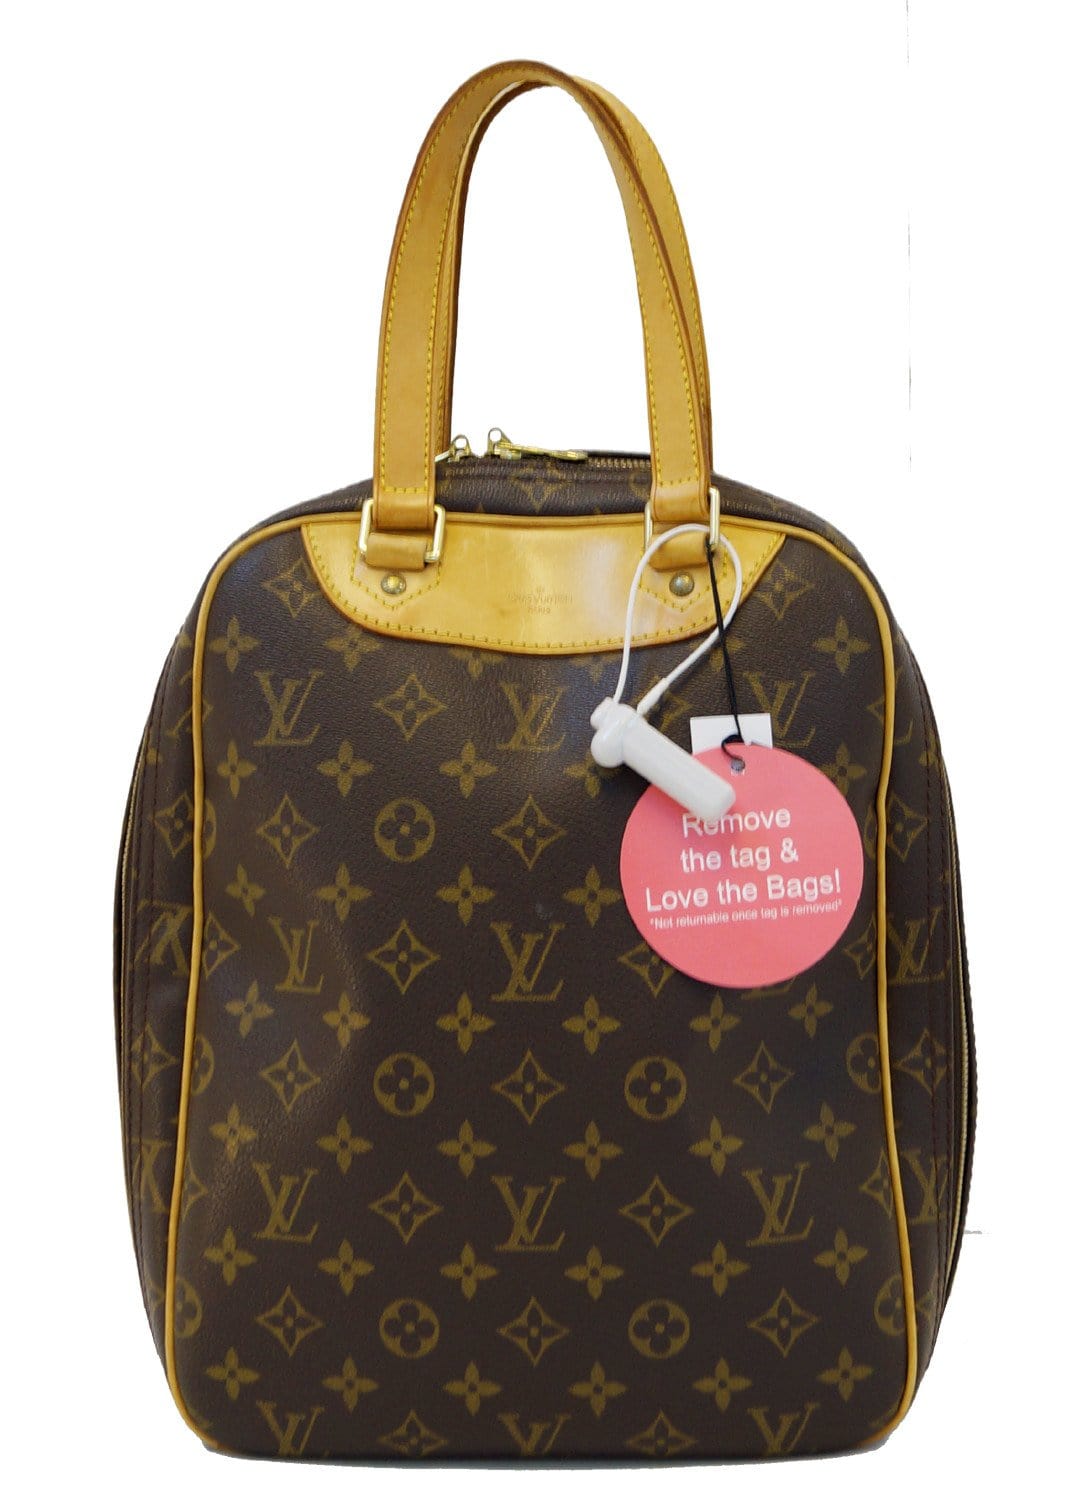 Discount Place - Beautiful HAND BAG 🛍️ Brand : Louis Vuitton Color :  AVAILABLE Impotent Quality Delivery All over 🇵🇰 #bagscollection  #bagsforwomen #gift #giftsforher #giftshop #fashionblogger #fashionista  #fashion2